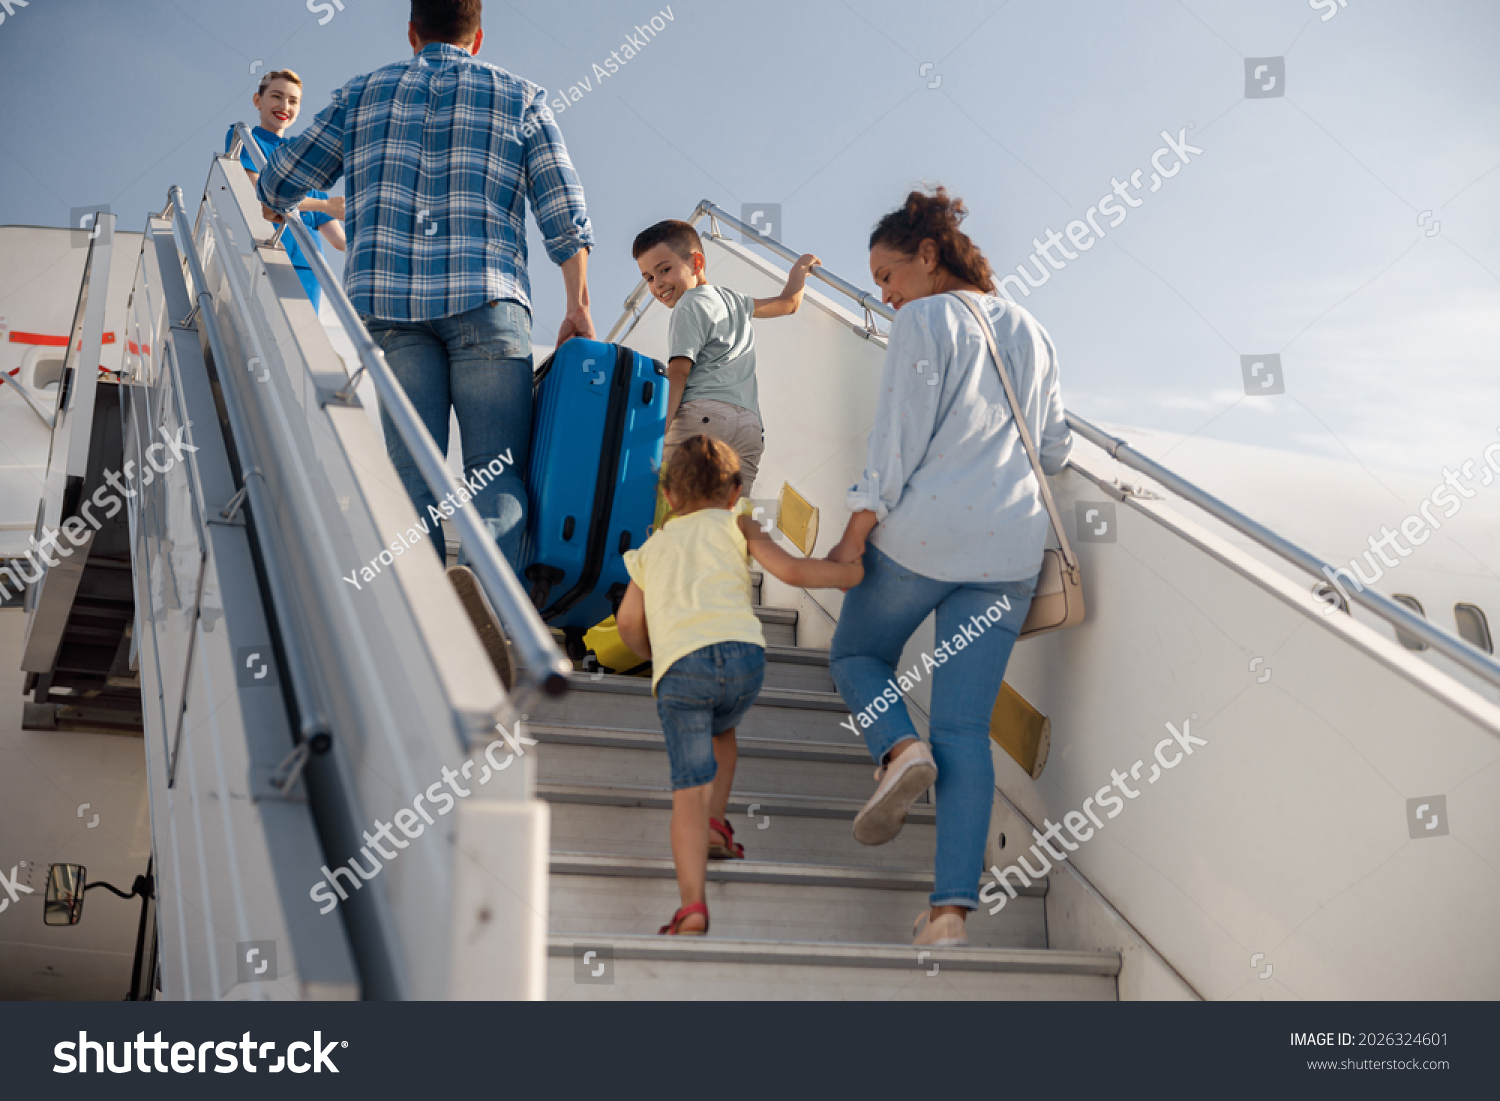 Back view of parents with two kids getting on, boarding the plane on a daytime, ready for summer vacations. People, traveling, vacation concept #2026324601